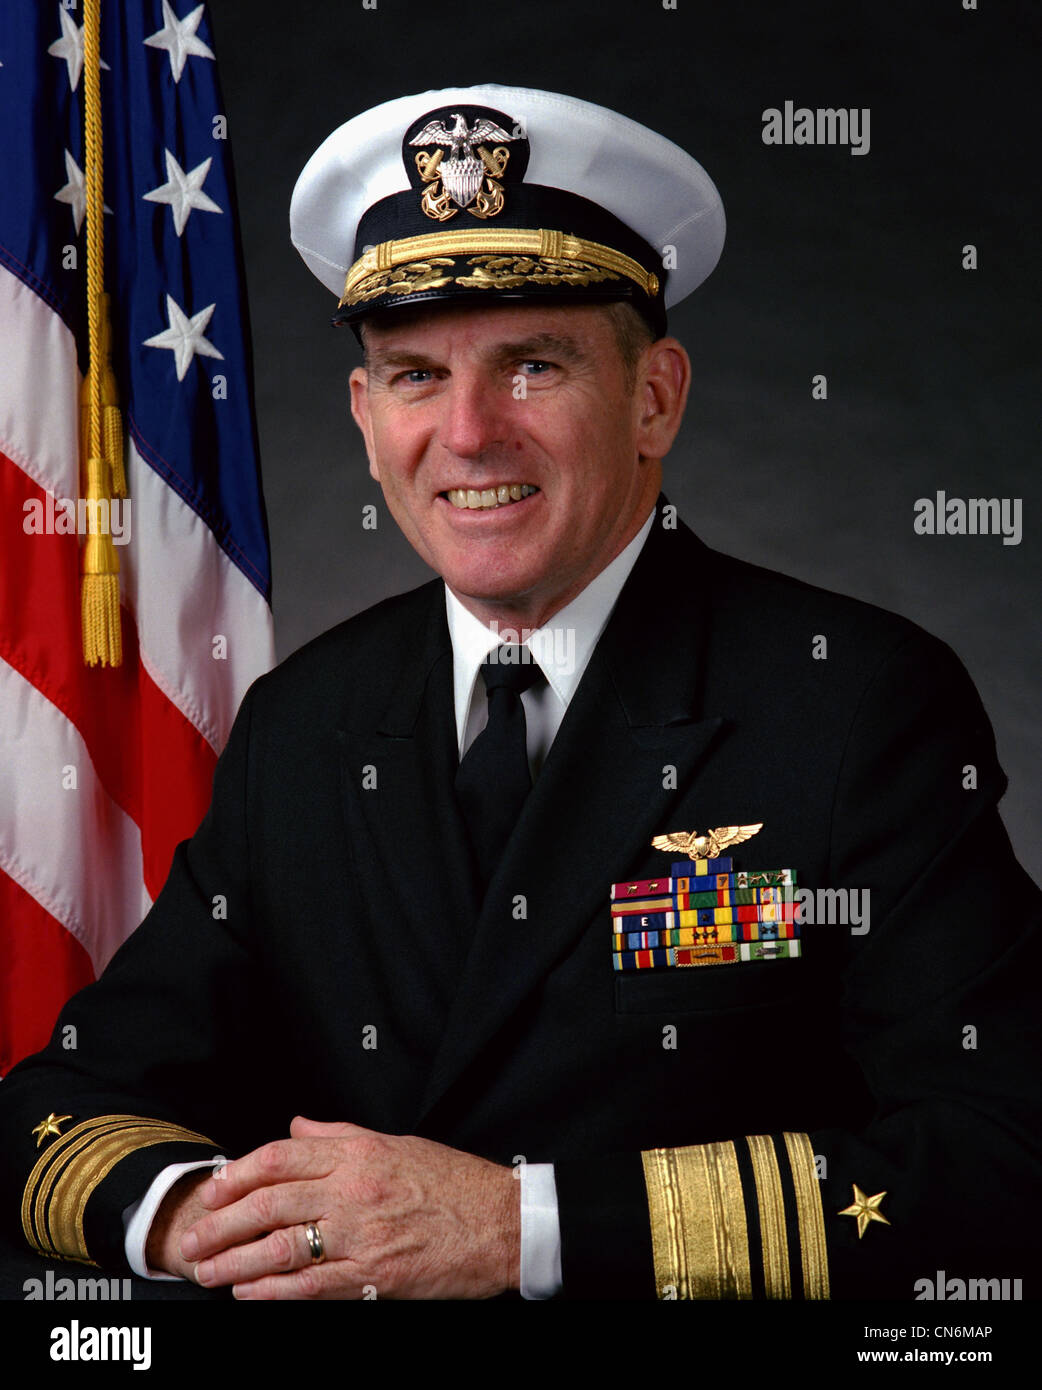 United States Navy Vice Admiral Richard Dunleavy Stock Photo